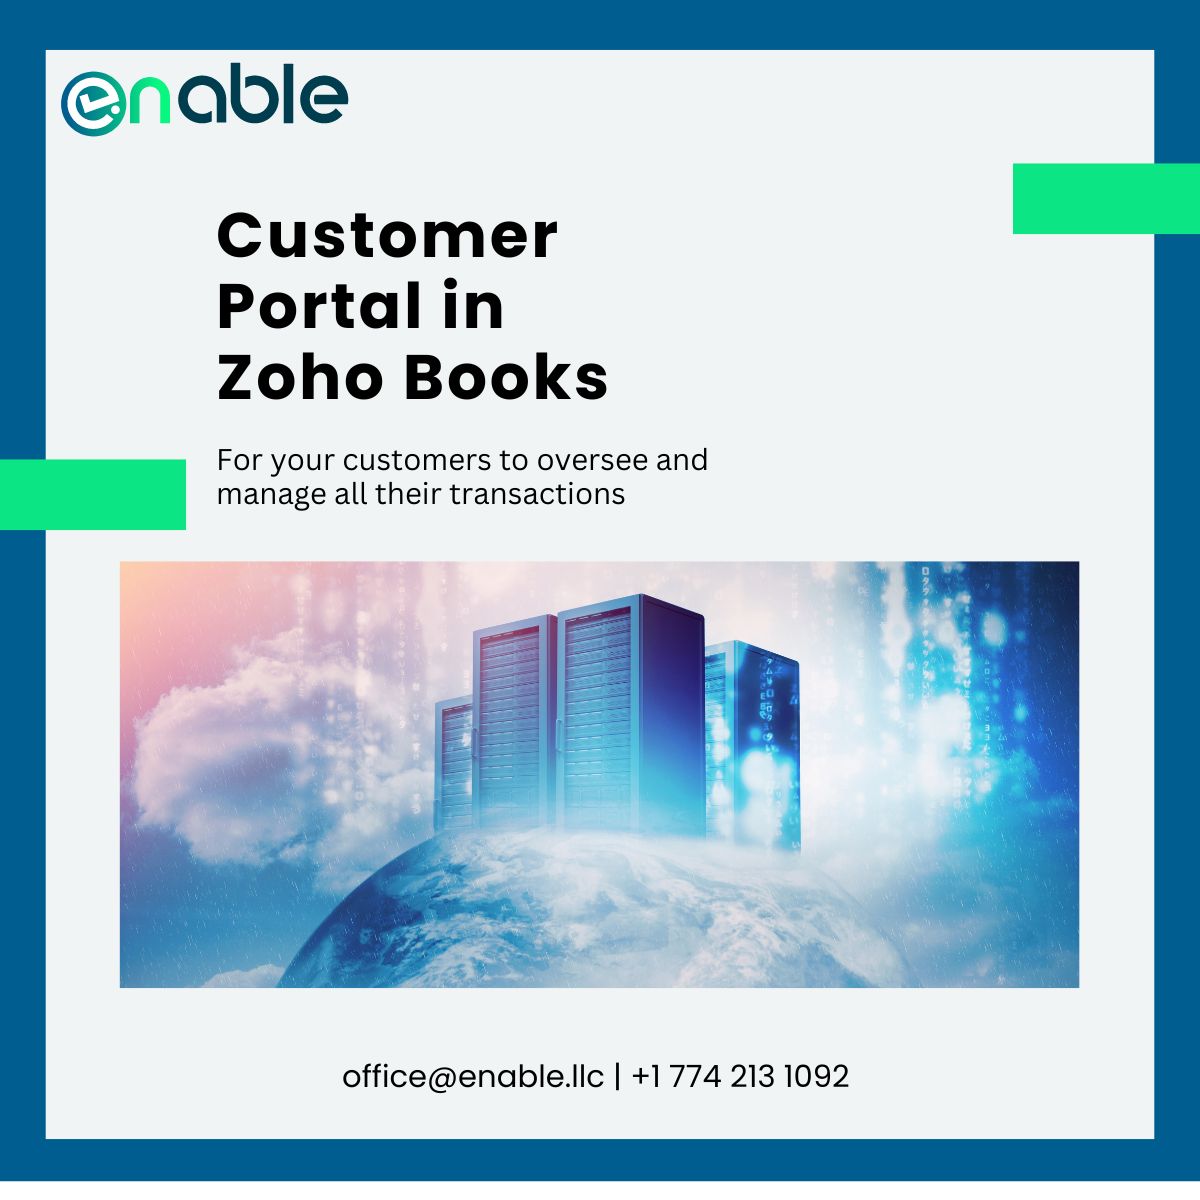 Customer Portal in Zoho Books is an area for your customers to oversee and manage all their transactions, granting them control over tasks such as accepting quotes or settling invoices all in one convenient location.
enable.llc
#zohobooks #customerportal #zohopartner